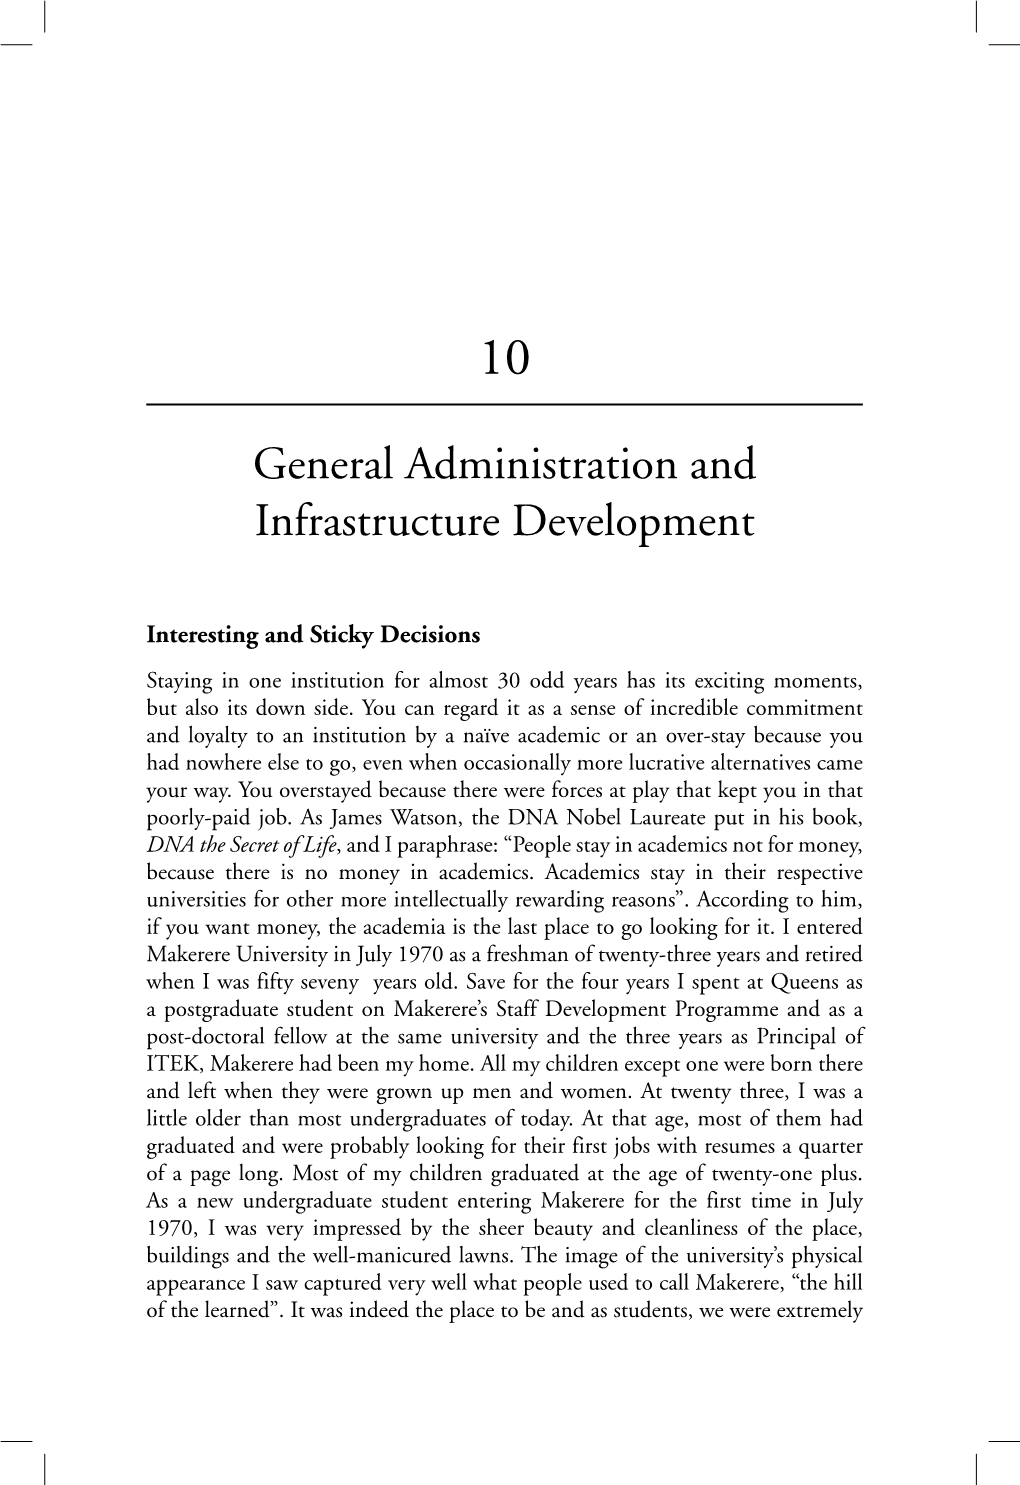 General Administration and Infrastructure Development